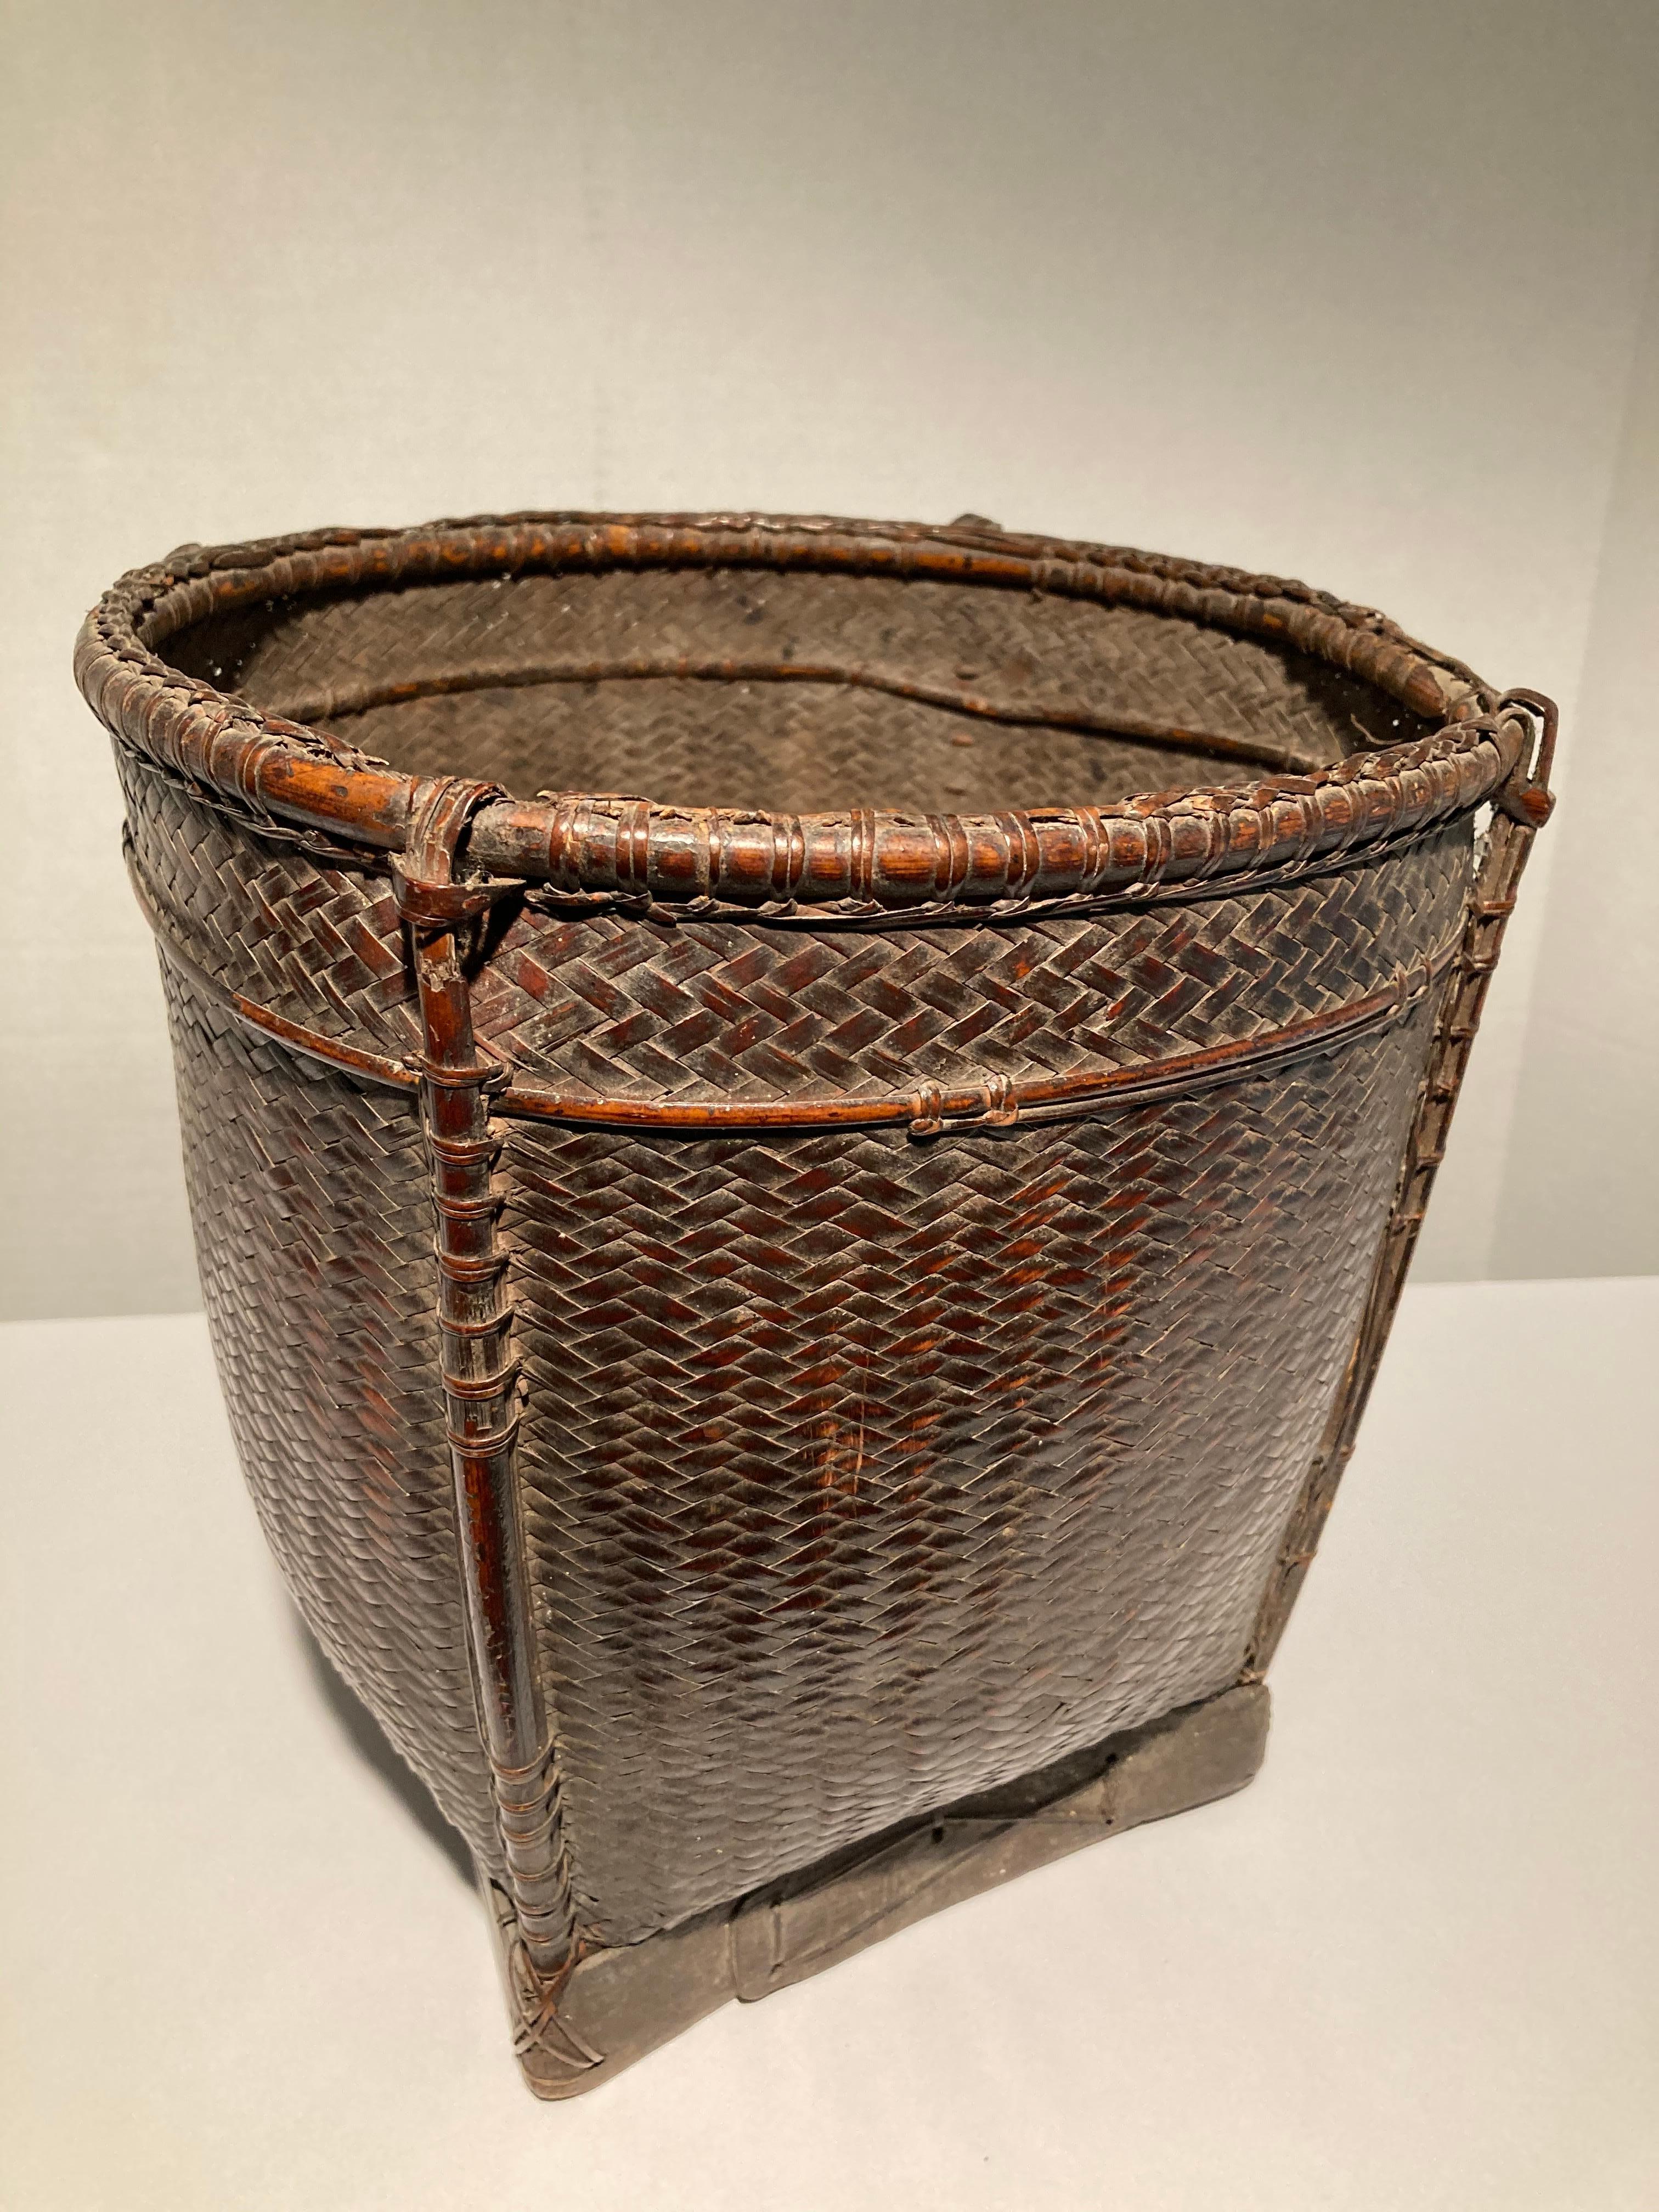 Woven rattan storage basket from the Palawan Islands of the westernmost Philippines. Excellent patina, superb quality and condition. From the collection of a retiree ship's captain who traveled regularly to the Philippines for over 40 years.